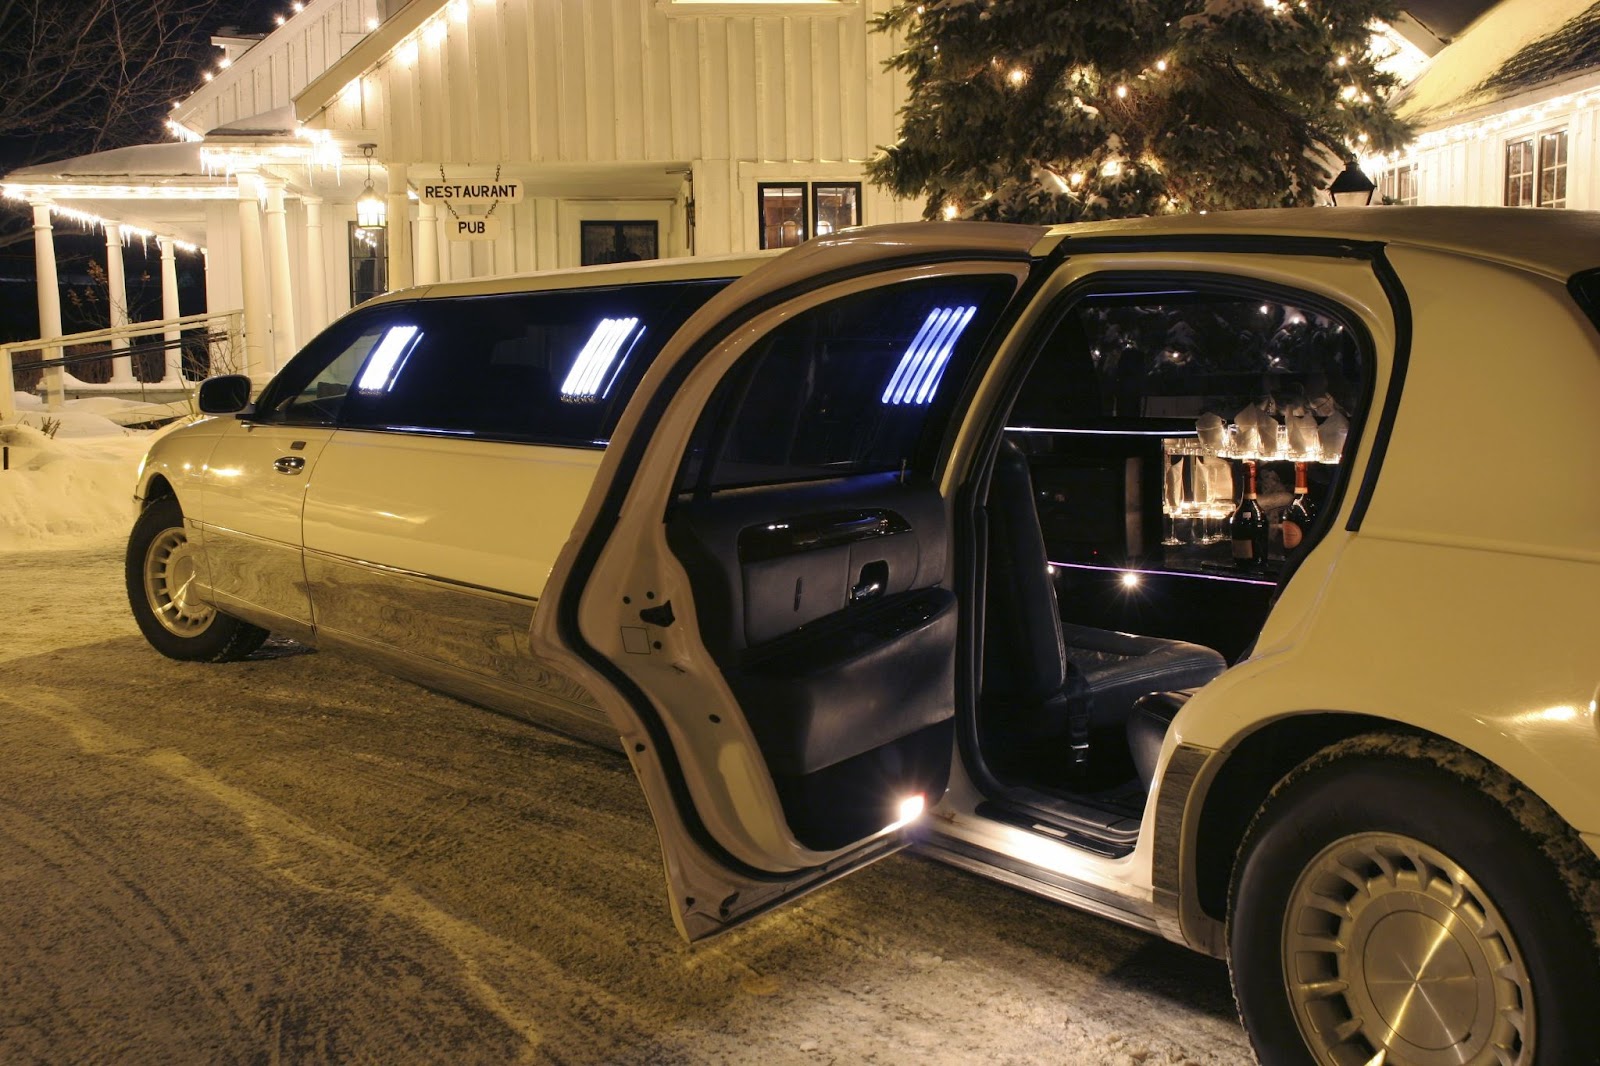 Seattle’s Premier Wedding Limo Service: Arrive in Style